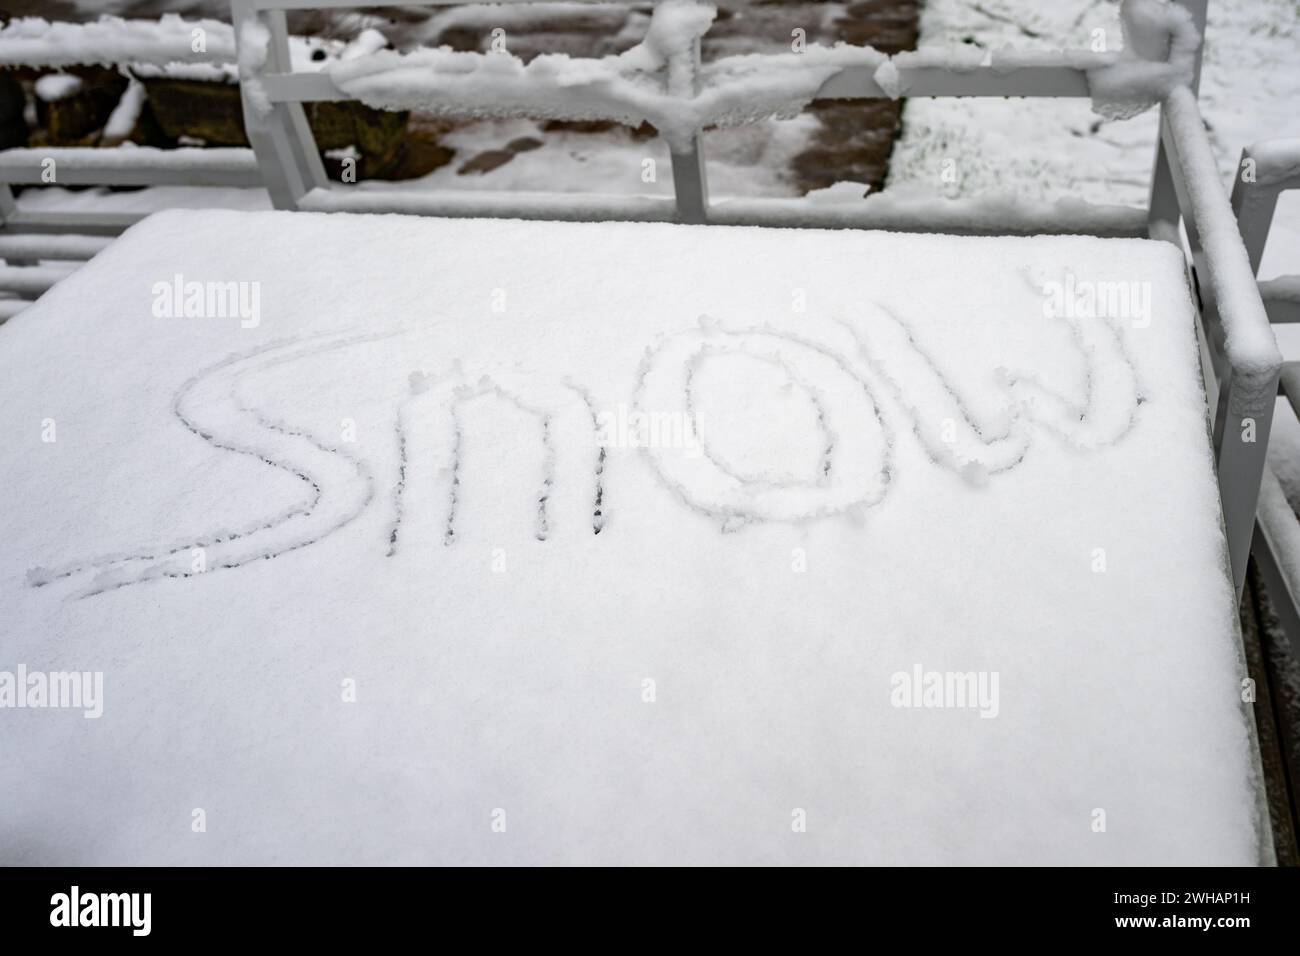 SNOW snow letters on a table top, written in the snow Stock Photo